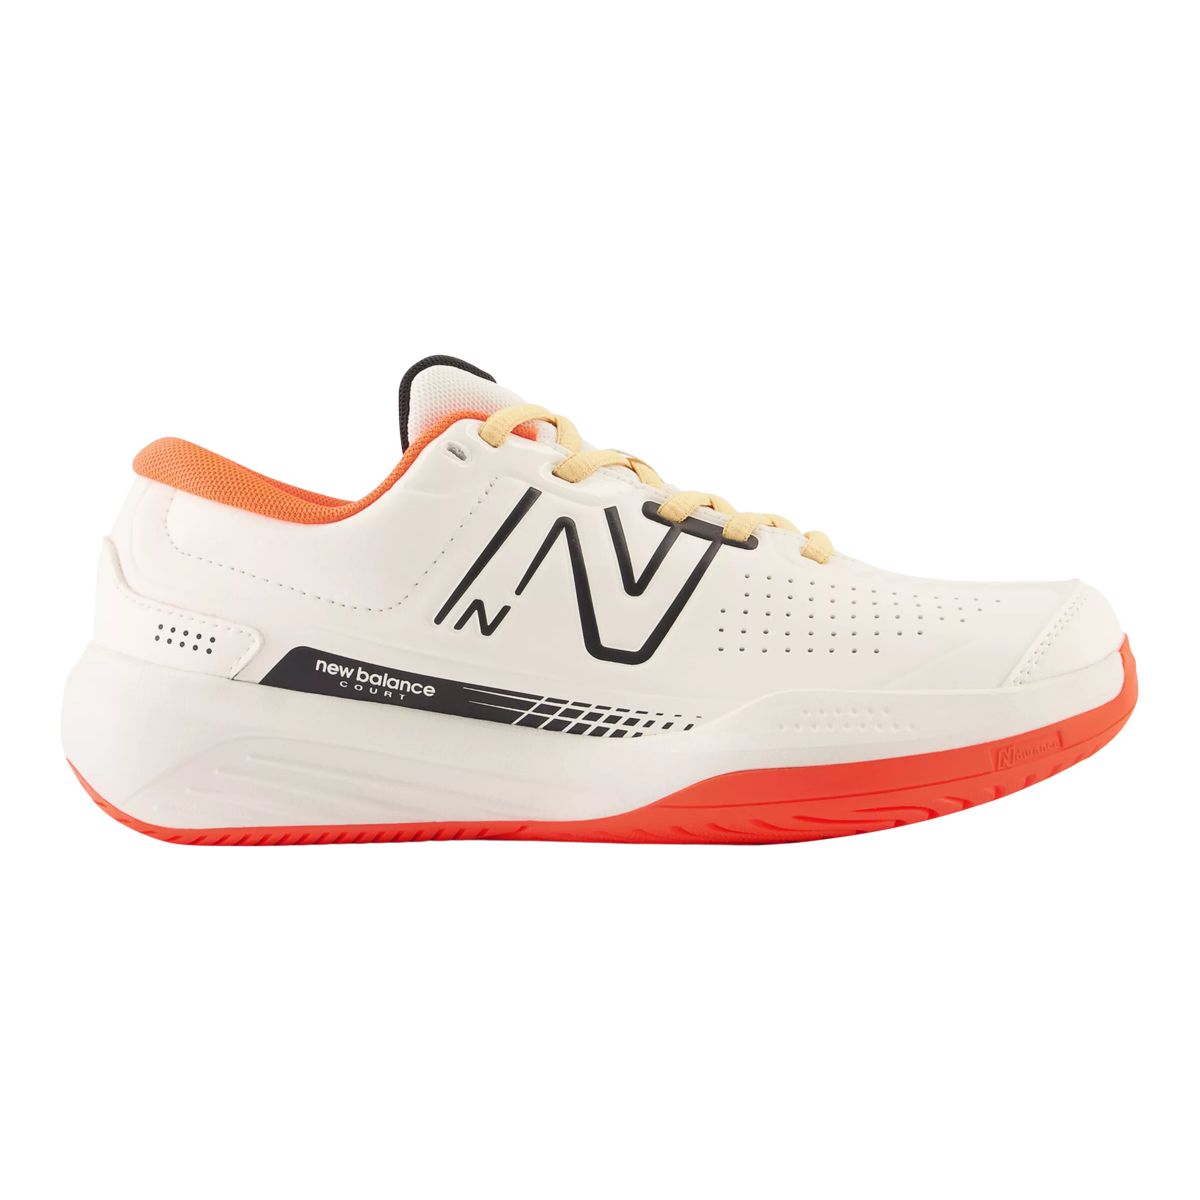 Image of New Balance Women's 696V5 Tennis Shoes